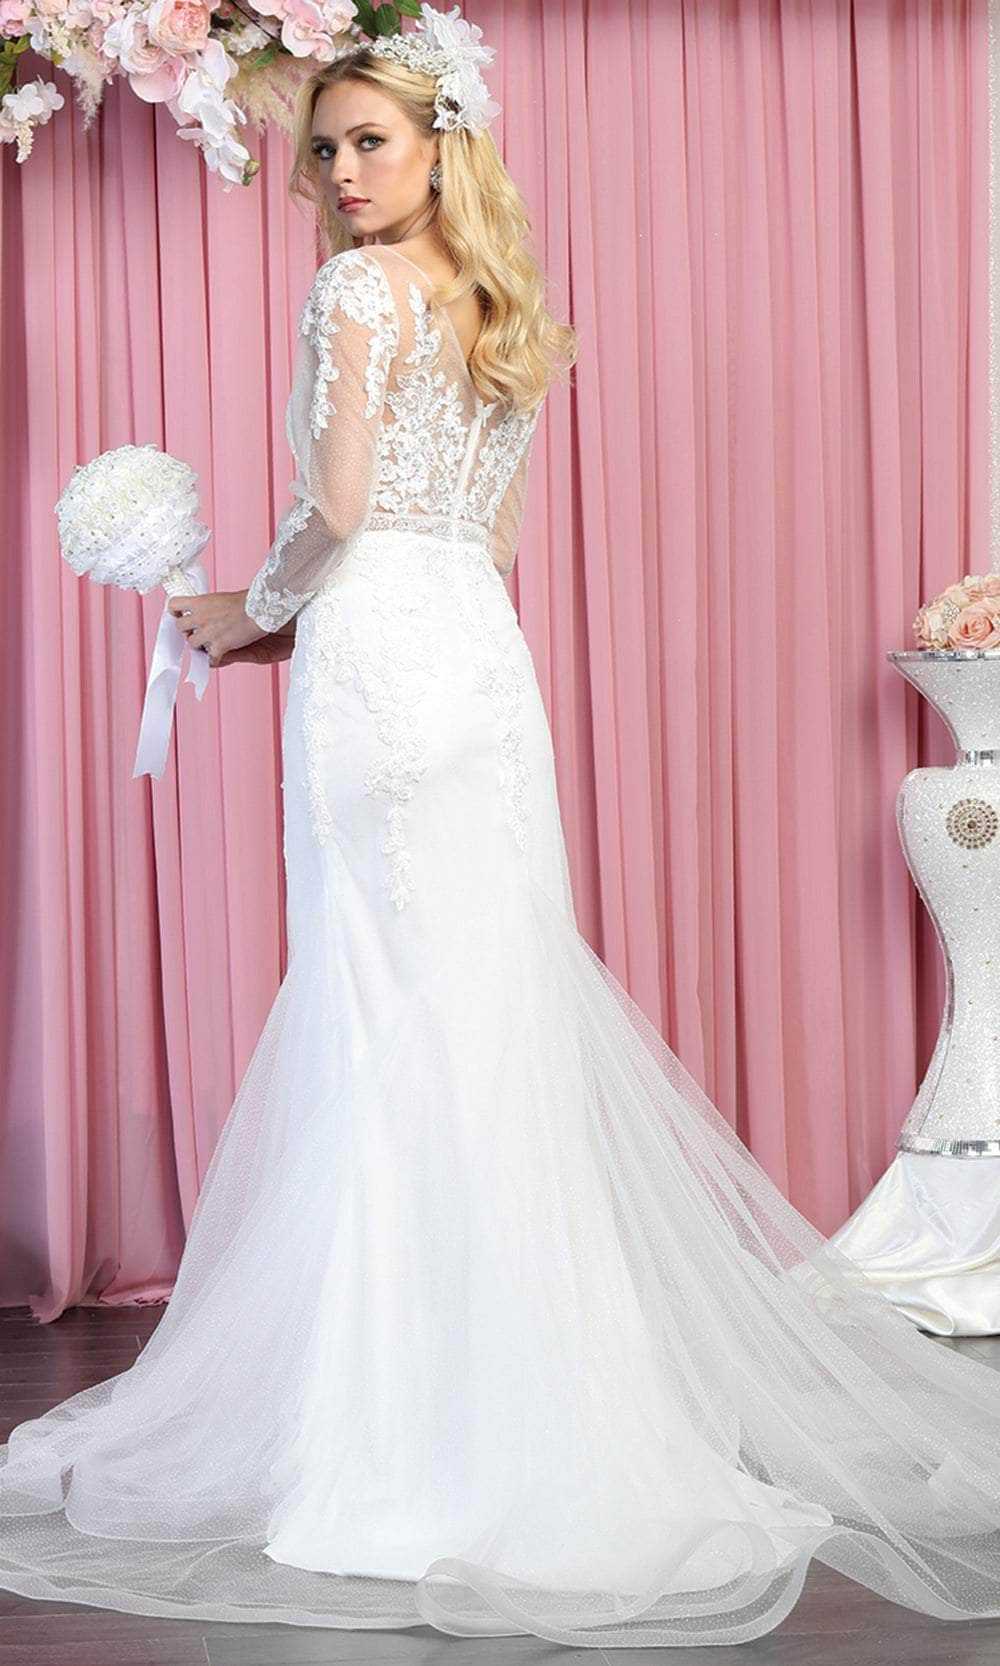 May Queen, May Queen RQ7892 - Long sleeves Deep V-neck Wedding Gown